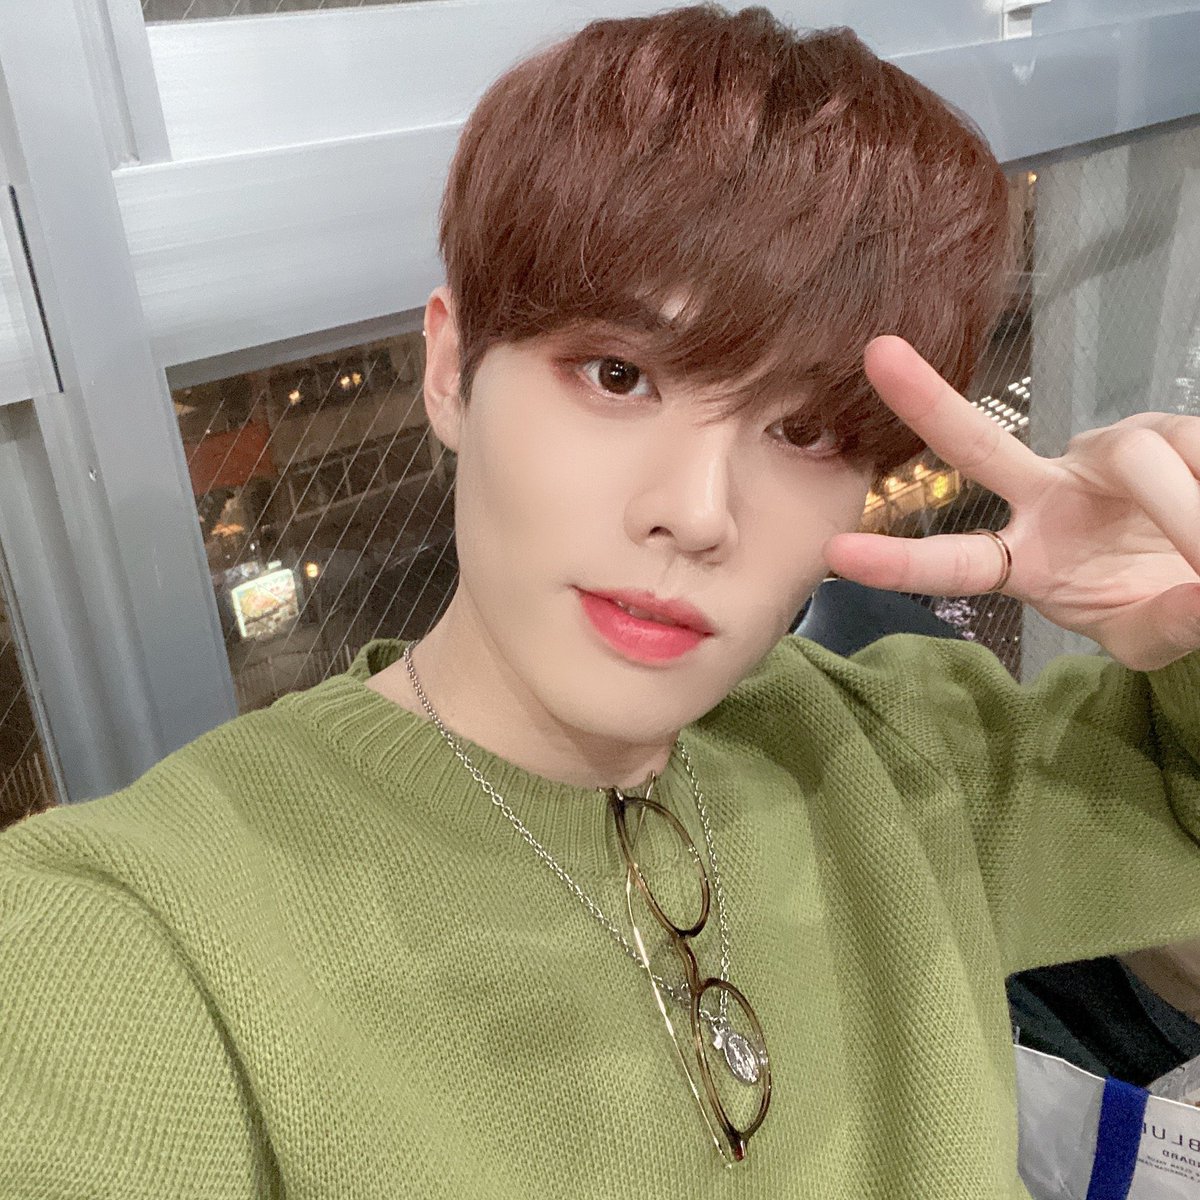 Next we have Yongseok -93 liner -Main vocalist yongseok have a very bubbly personality and he laughs and makes others laugh a lot. his voice is piercing and unique, there’s not a voice like his out there. it’s really hard to believe he’s the oldest because of how baby he is.